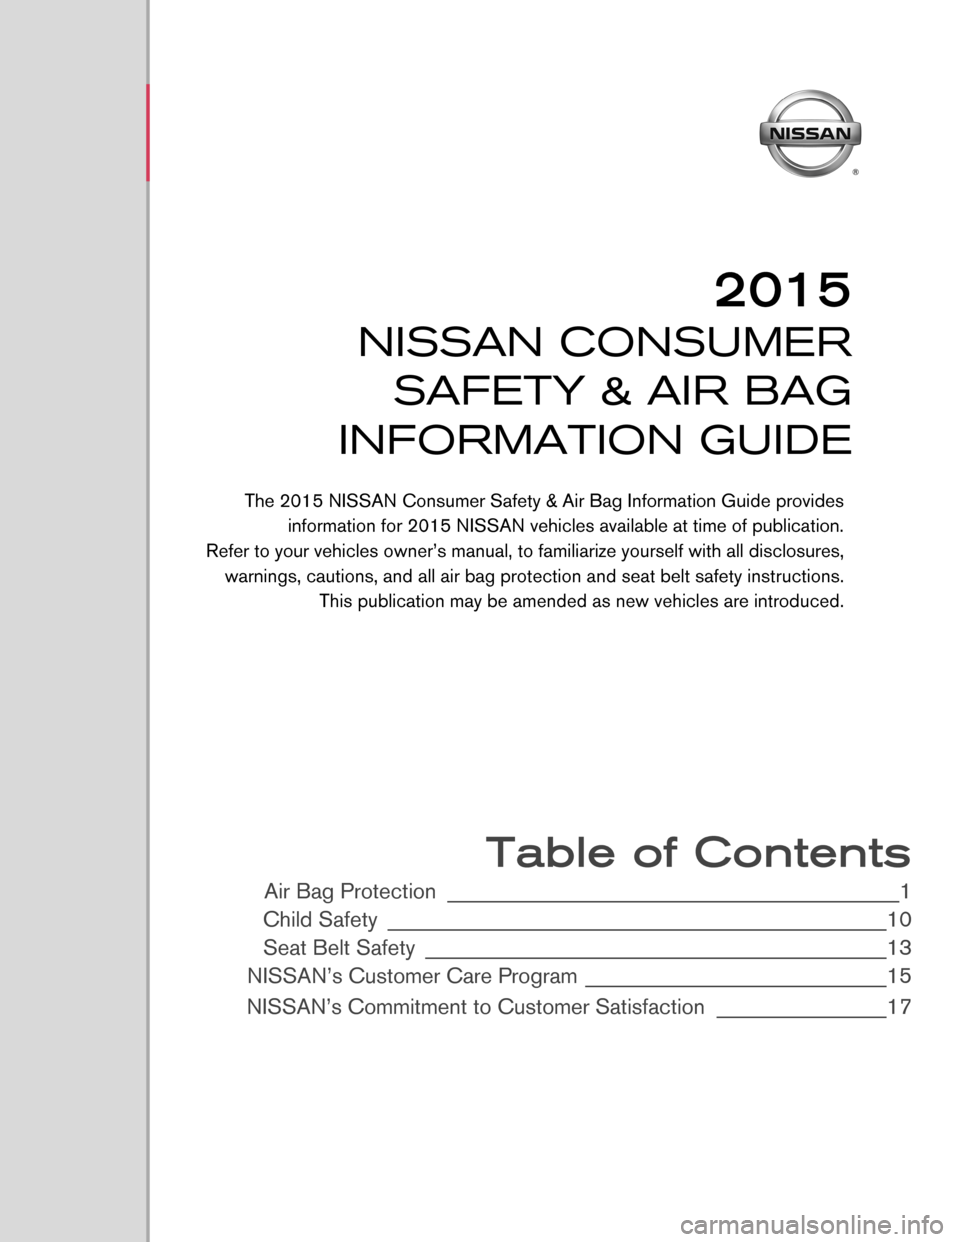 NISSAN QUEST 2015 RE52 / 4.G Consumer Safety Air Bag Information Guide  
 
 
 
 
 
 
 
 
 
 
 
 
 
 
 
 
 
 
 
 
 
 
 Table of Contents 
Air Bag Protection __________________\d__________________\d____________1 
Child \fafety _________________________\d__________________\